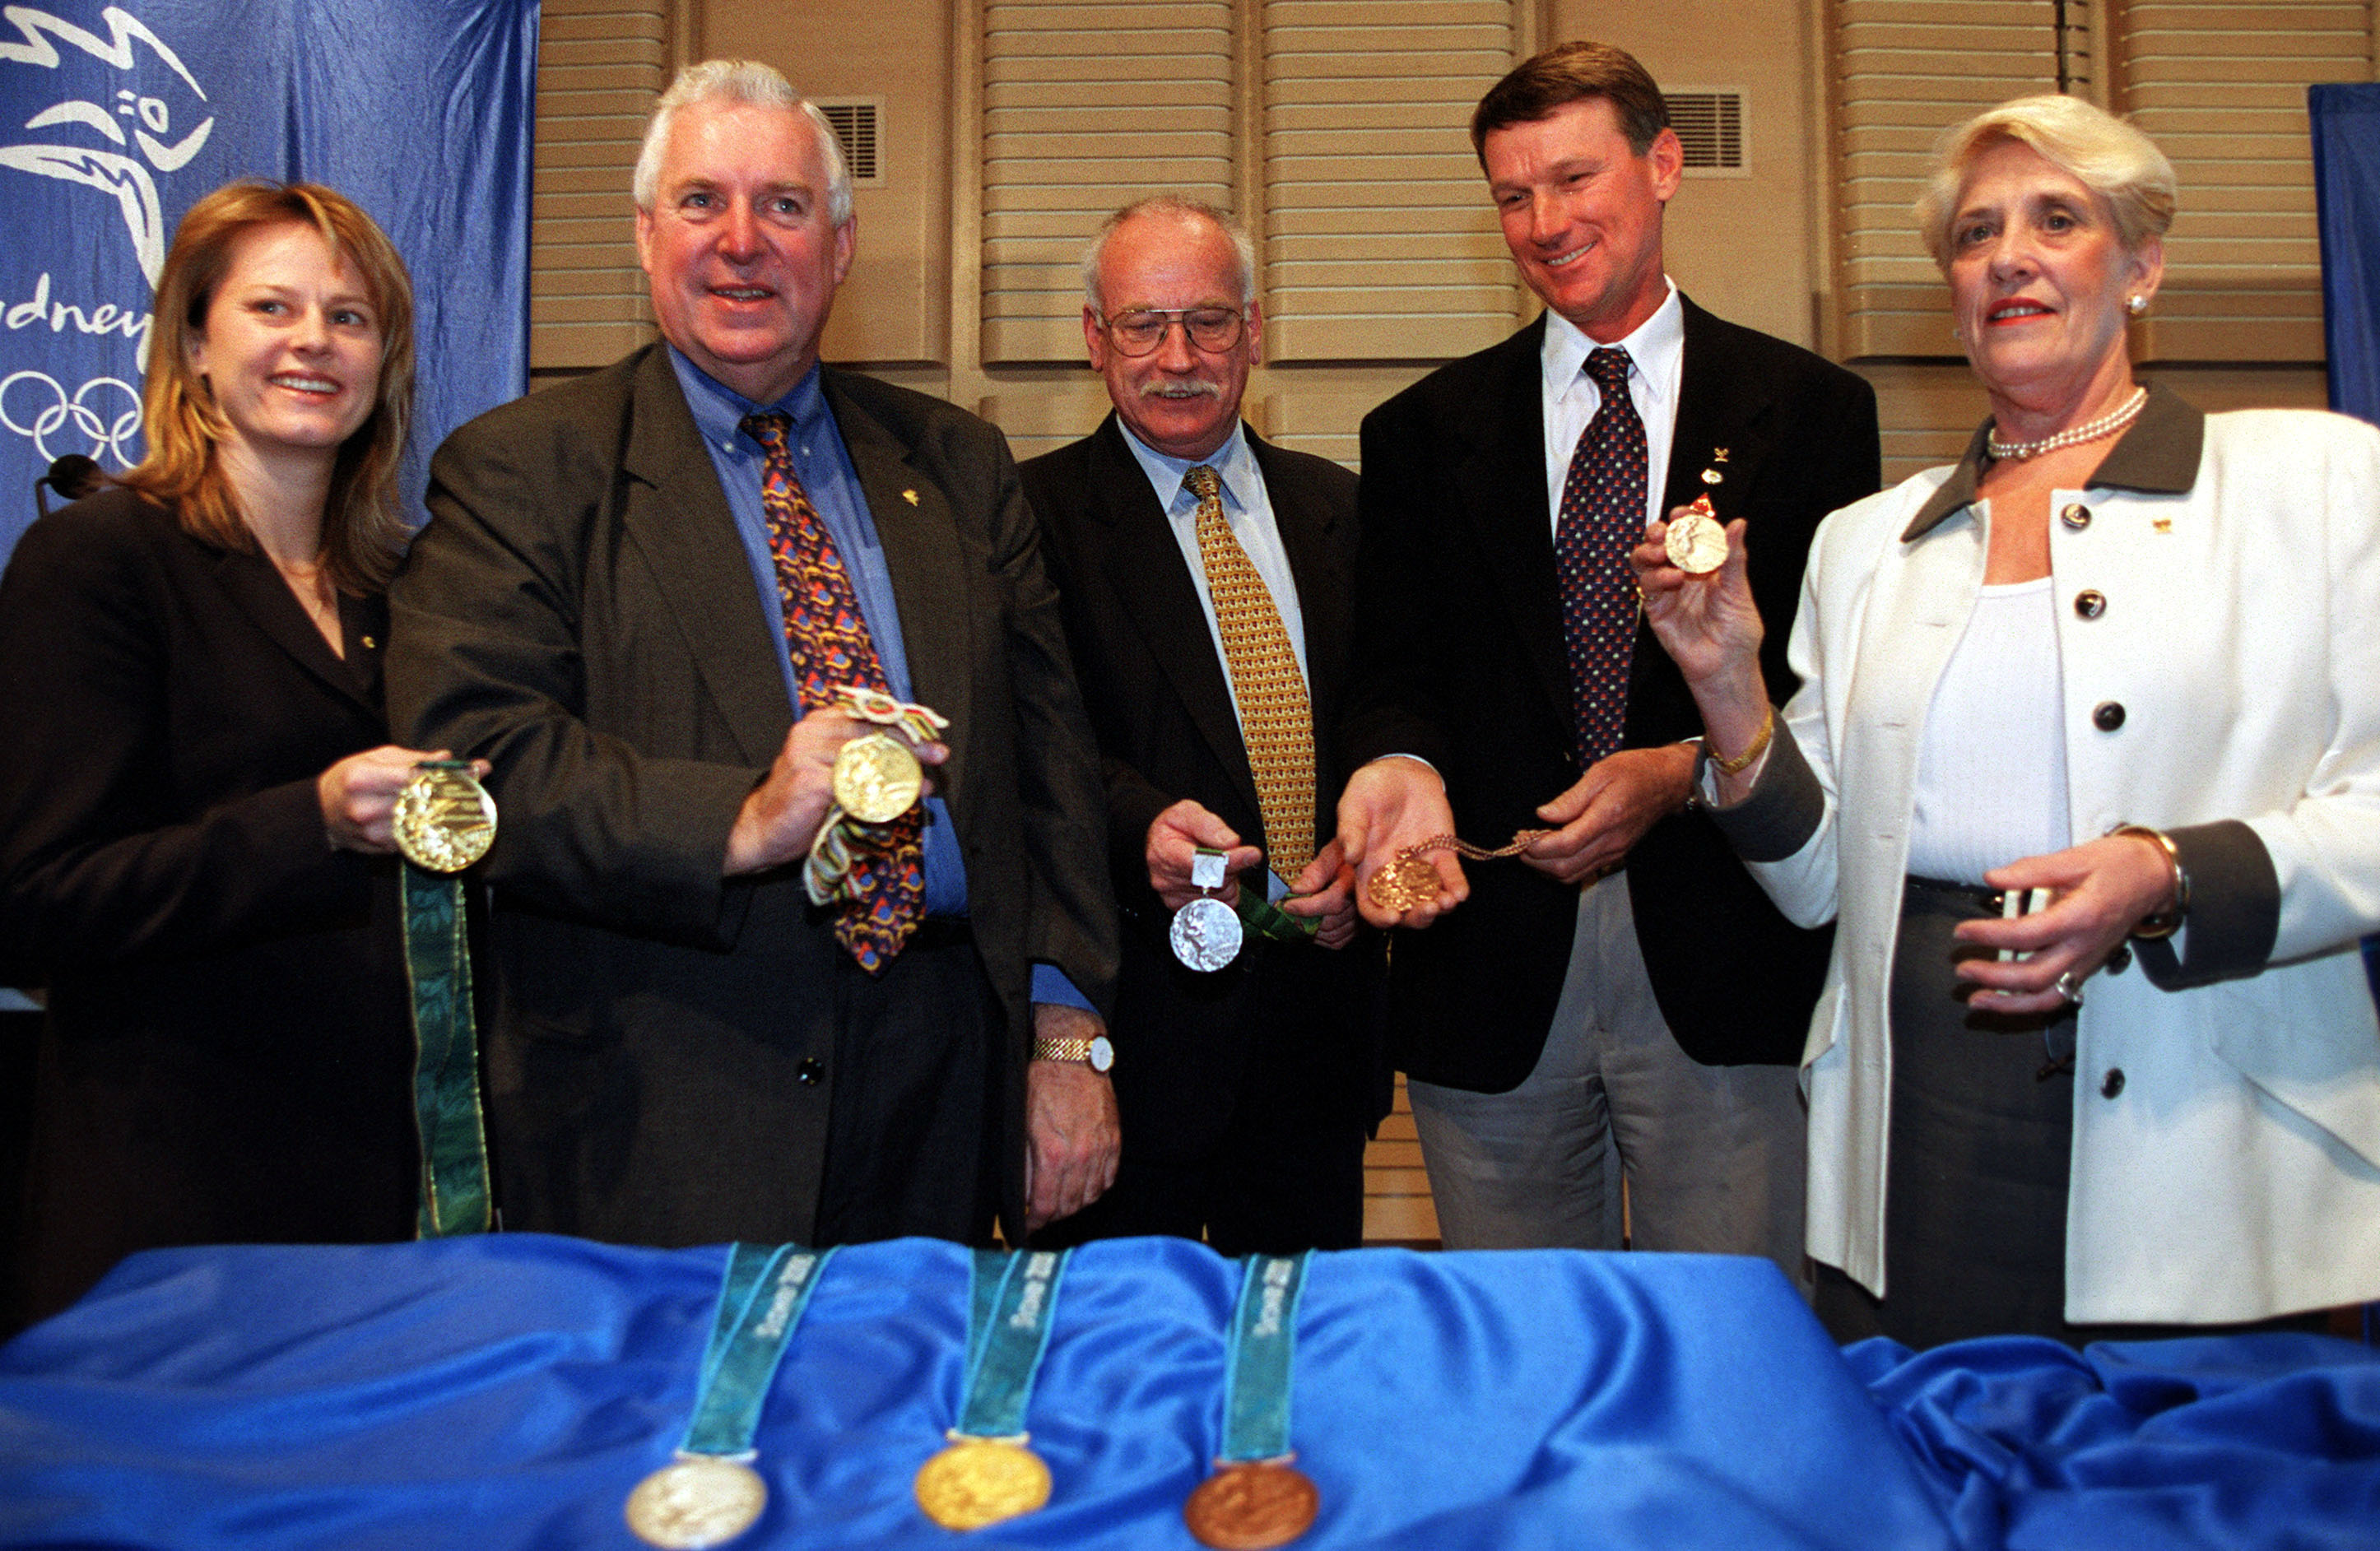 12 Aug 2000: Australian medal winners (from left) Danielle Roche (1996 Gold), Kevin Berry (1964 Gold), Peter Norman (1968 Silver), Ian Brown (1976 Bronze) and Sandra Morgan (1956 Gold) pose with medals during a press conference at the Sydney Opera Housein Sydney, Australia. Mandatory Credit: Adam Pretty/ALLSPORT